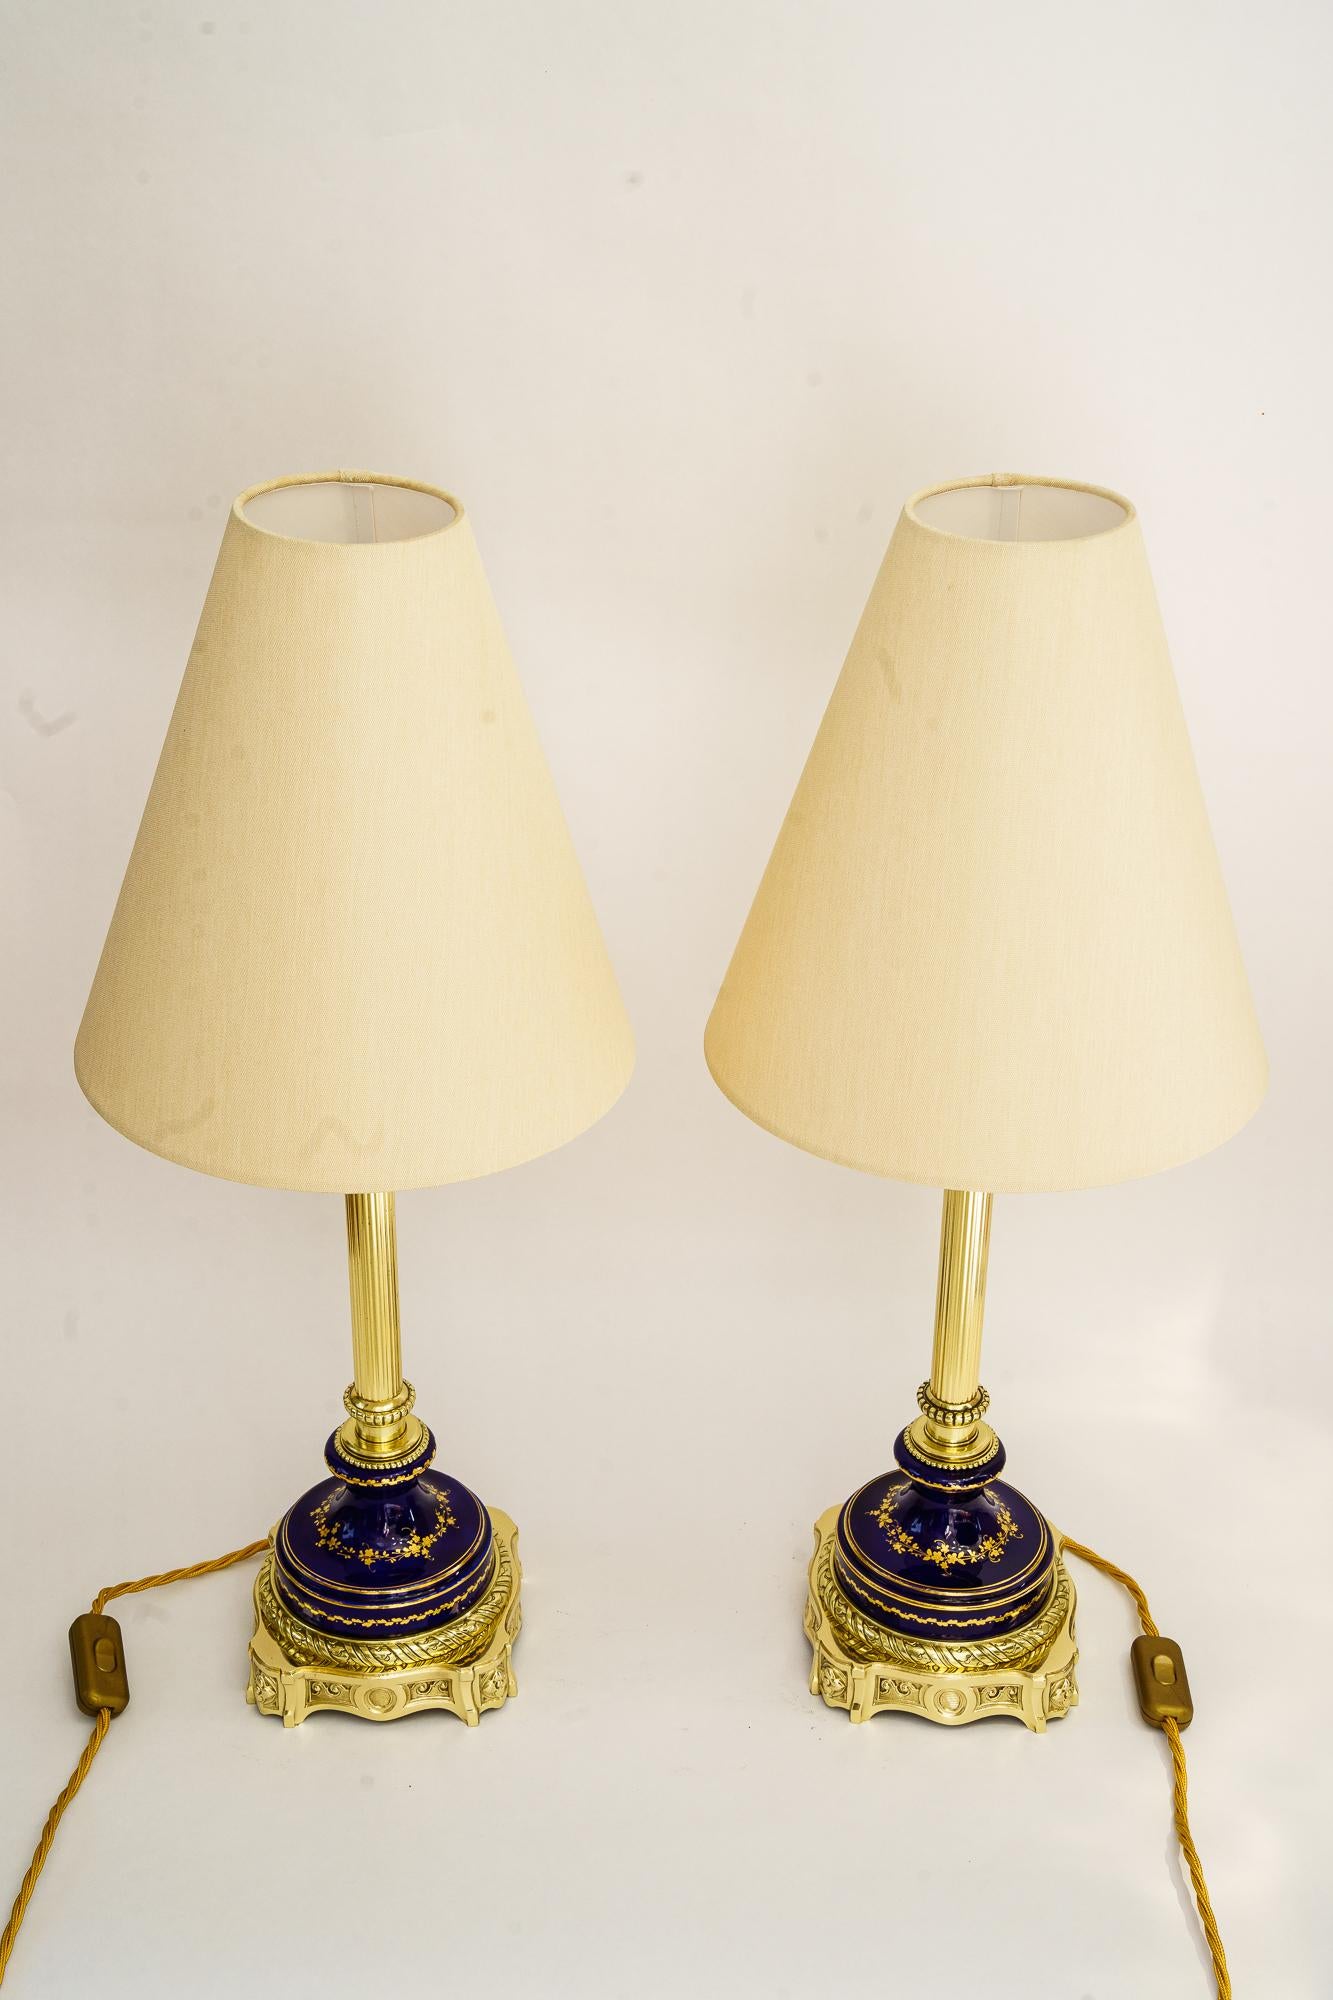 2 Big Historistic Table lamp vienna around 1890s
Ceramic gilted
Brass polished and stove enameled
The fabric shade is replaced ( new ) 
